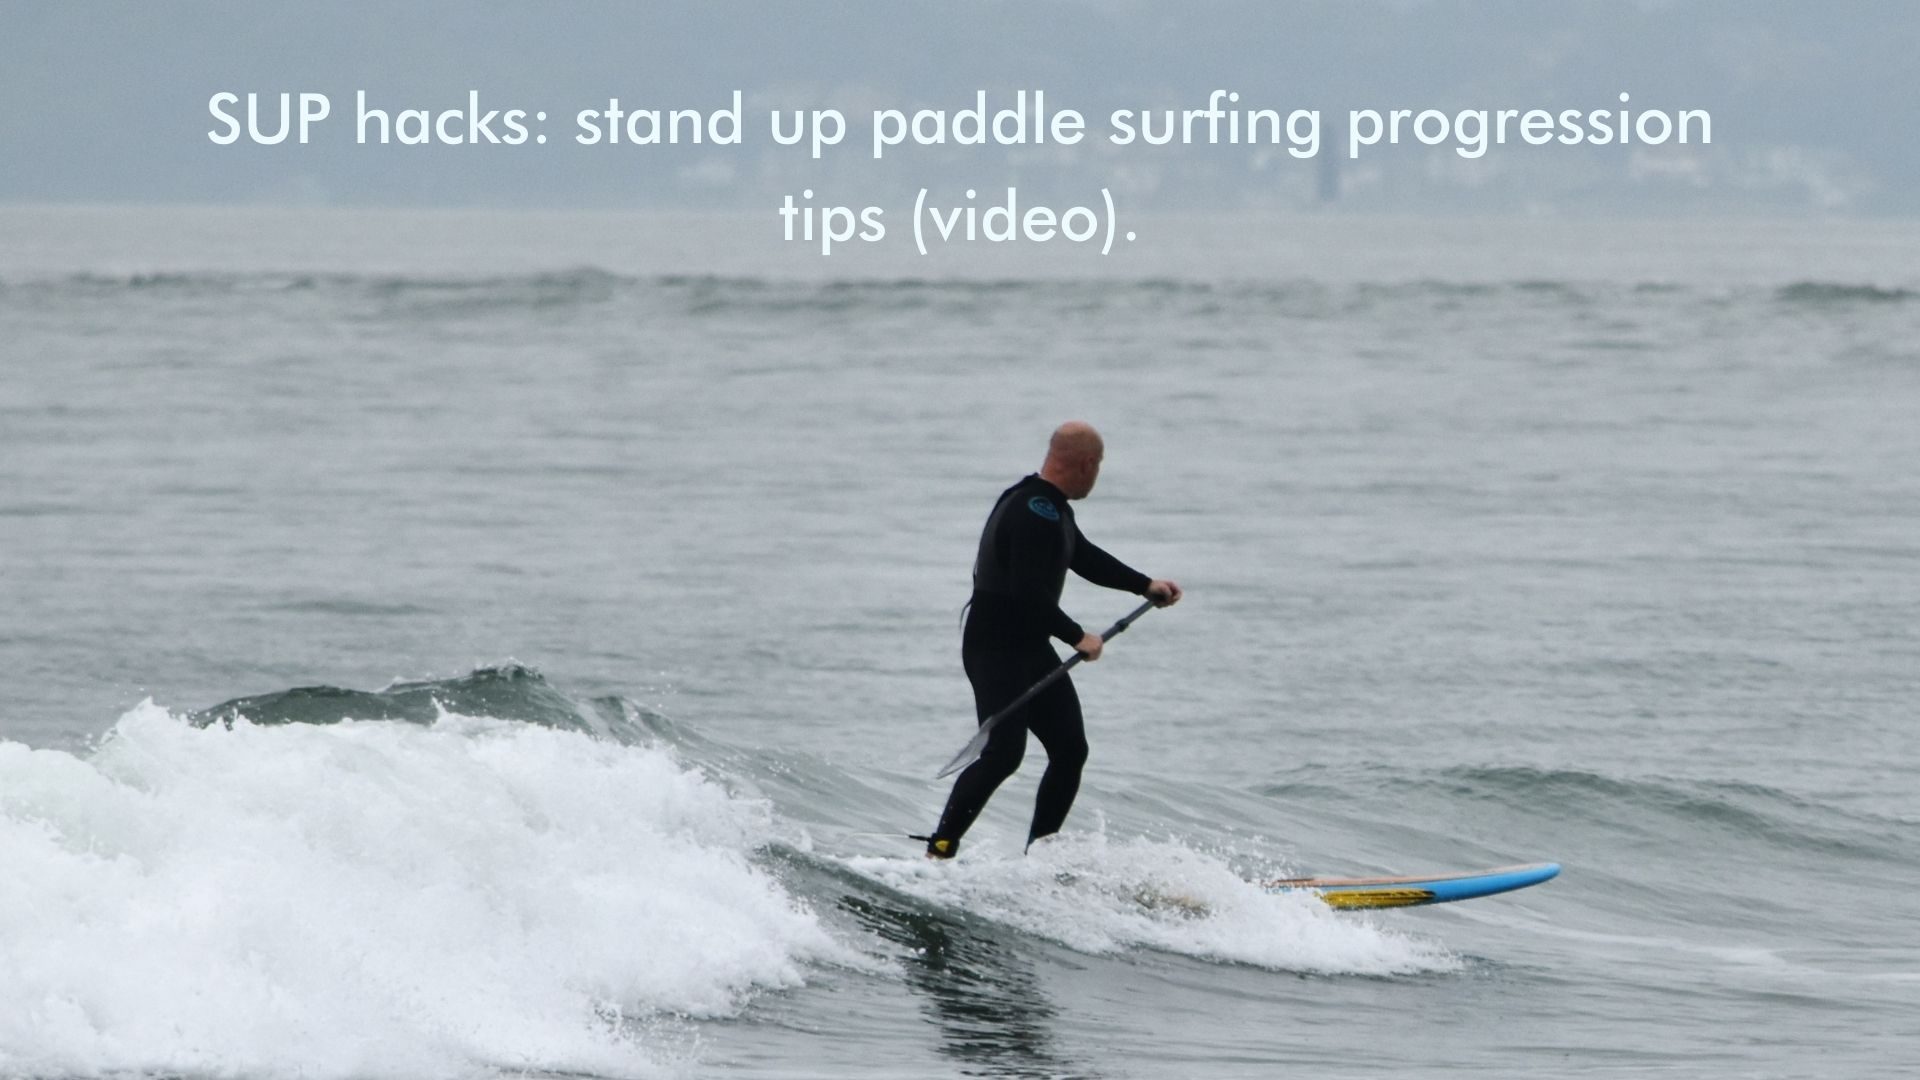 You are currently viewing SUP hacks: stand up paddle surfing progression tips (video).